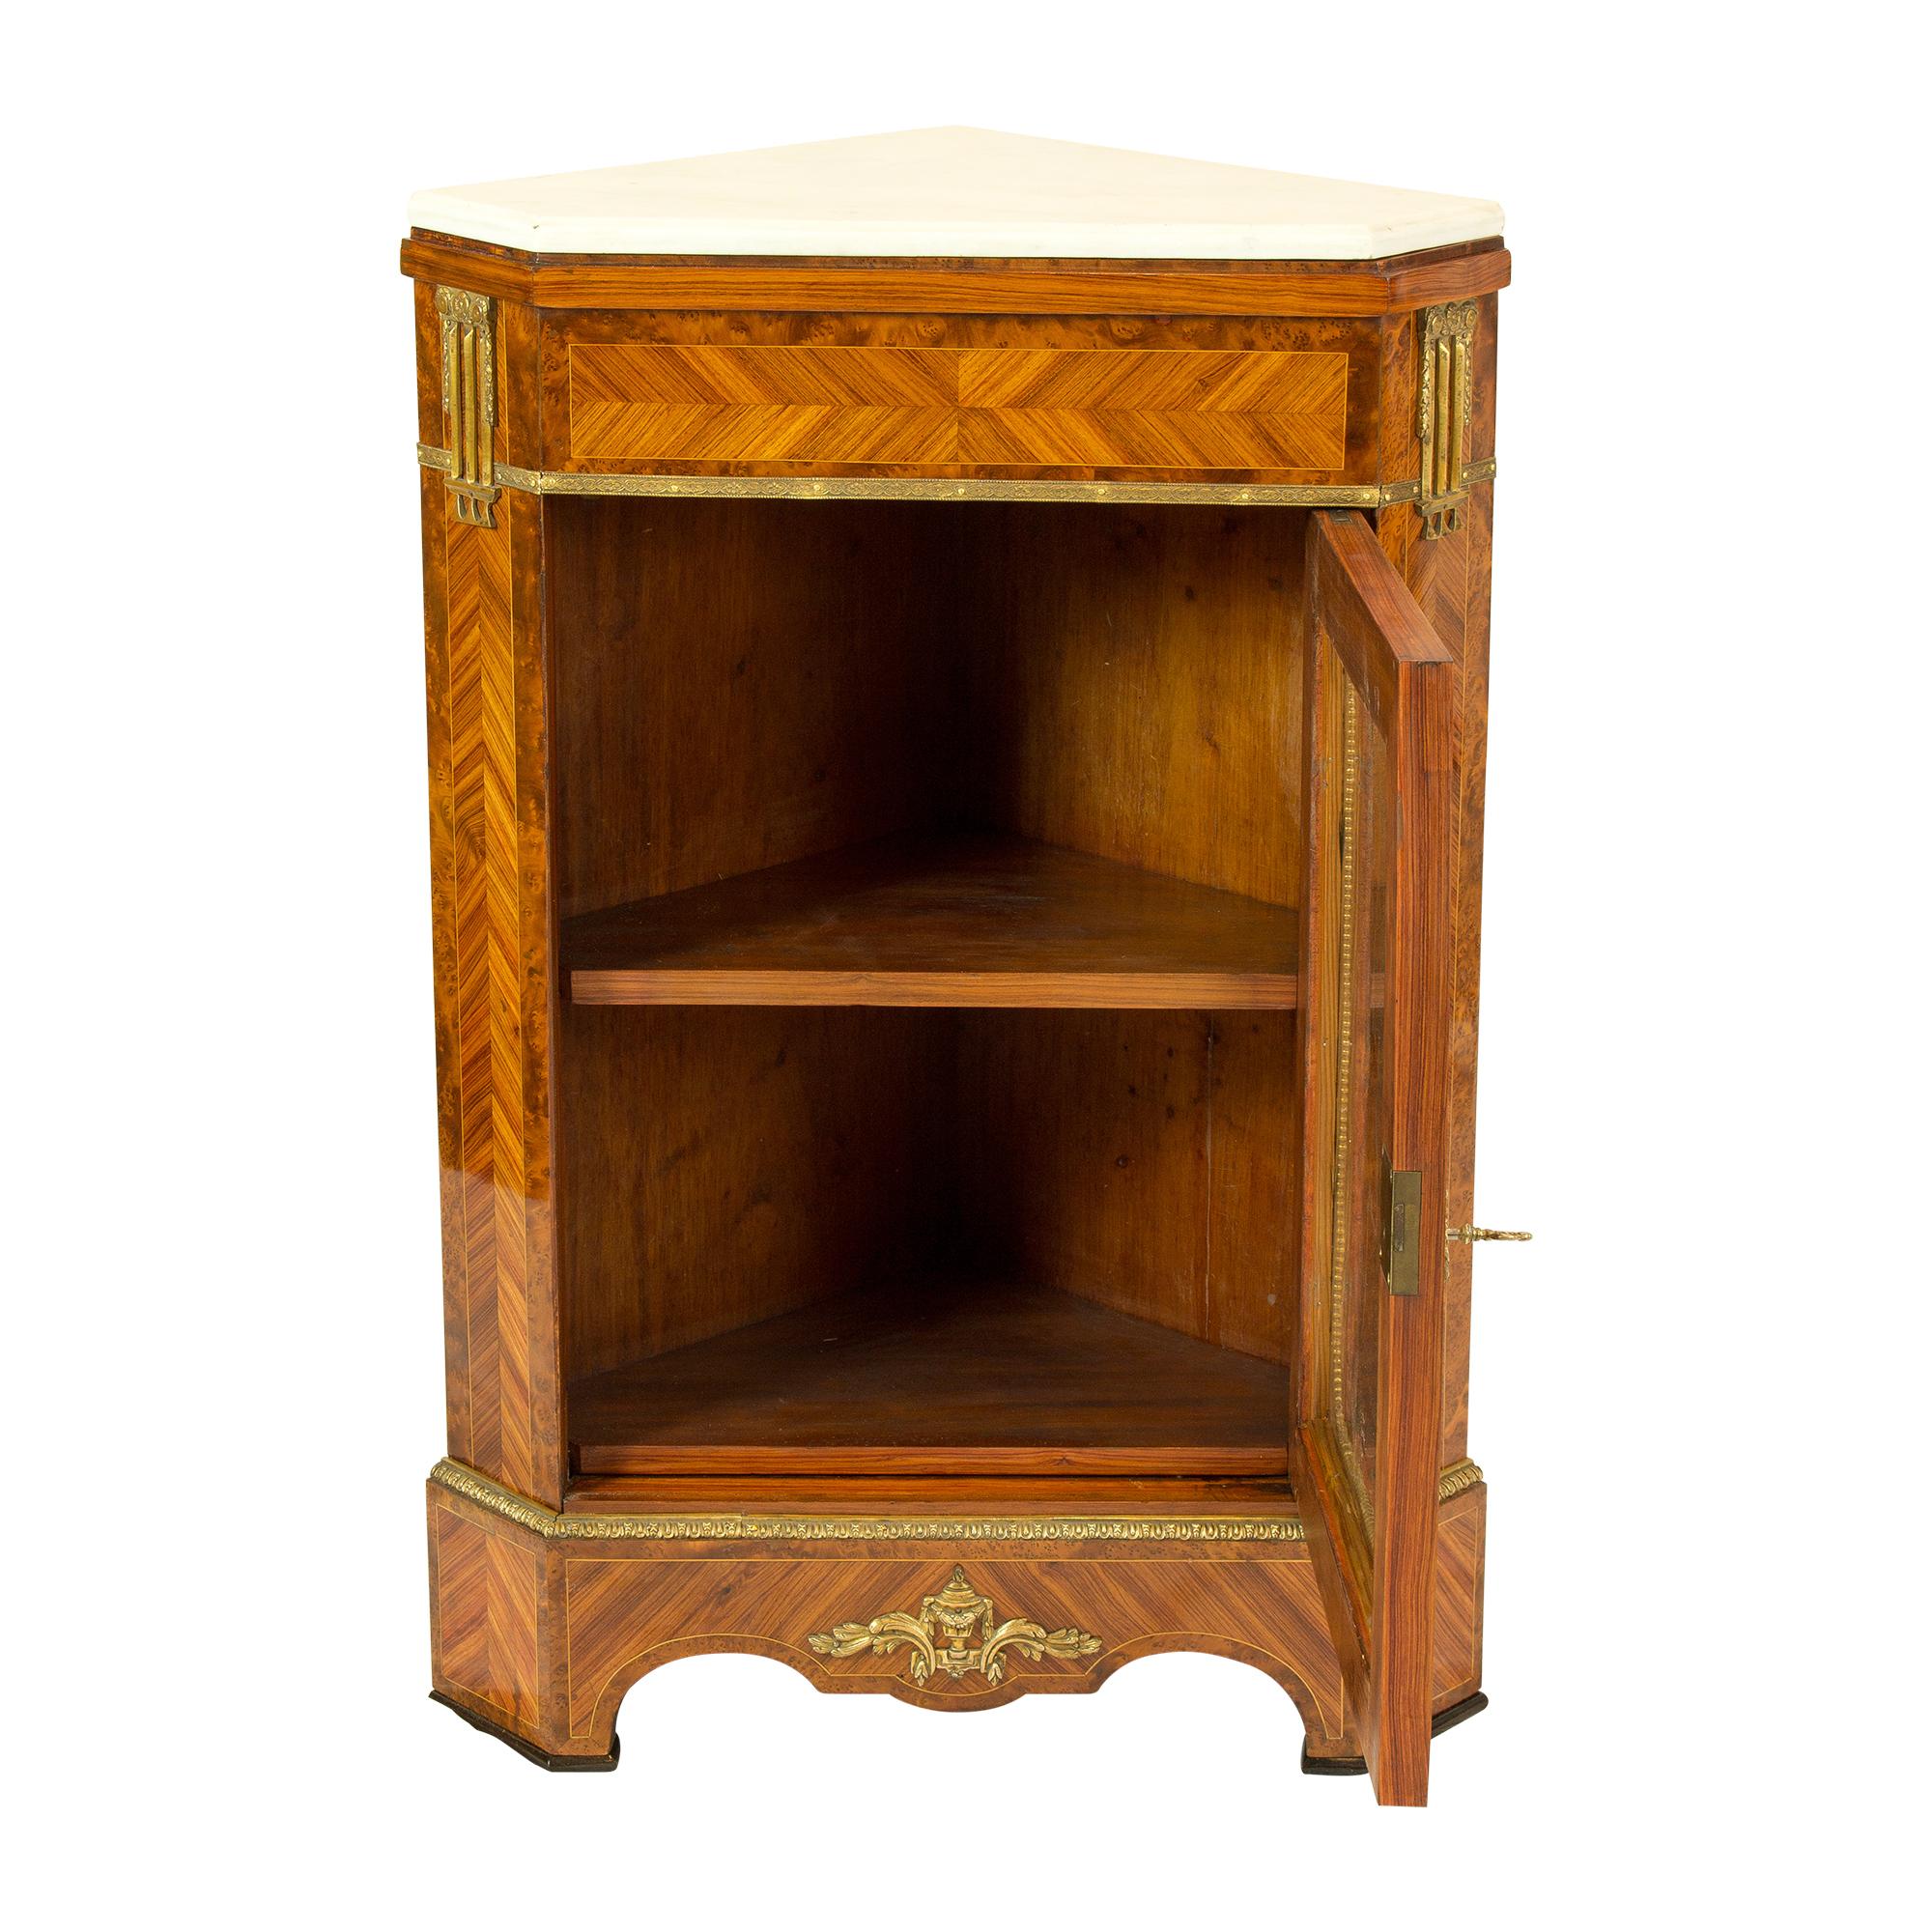 The corner cabinet comes from Paris, circa 1880 and was built in the style of Louis XVI, using walnut, frutiwooad and root wood. The top of the cabinet is finished with a white marble top. The corner cupboard is from Paris from the workshop/artist: